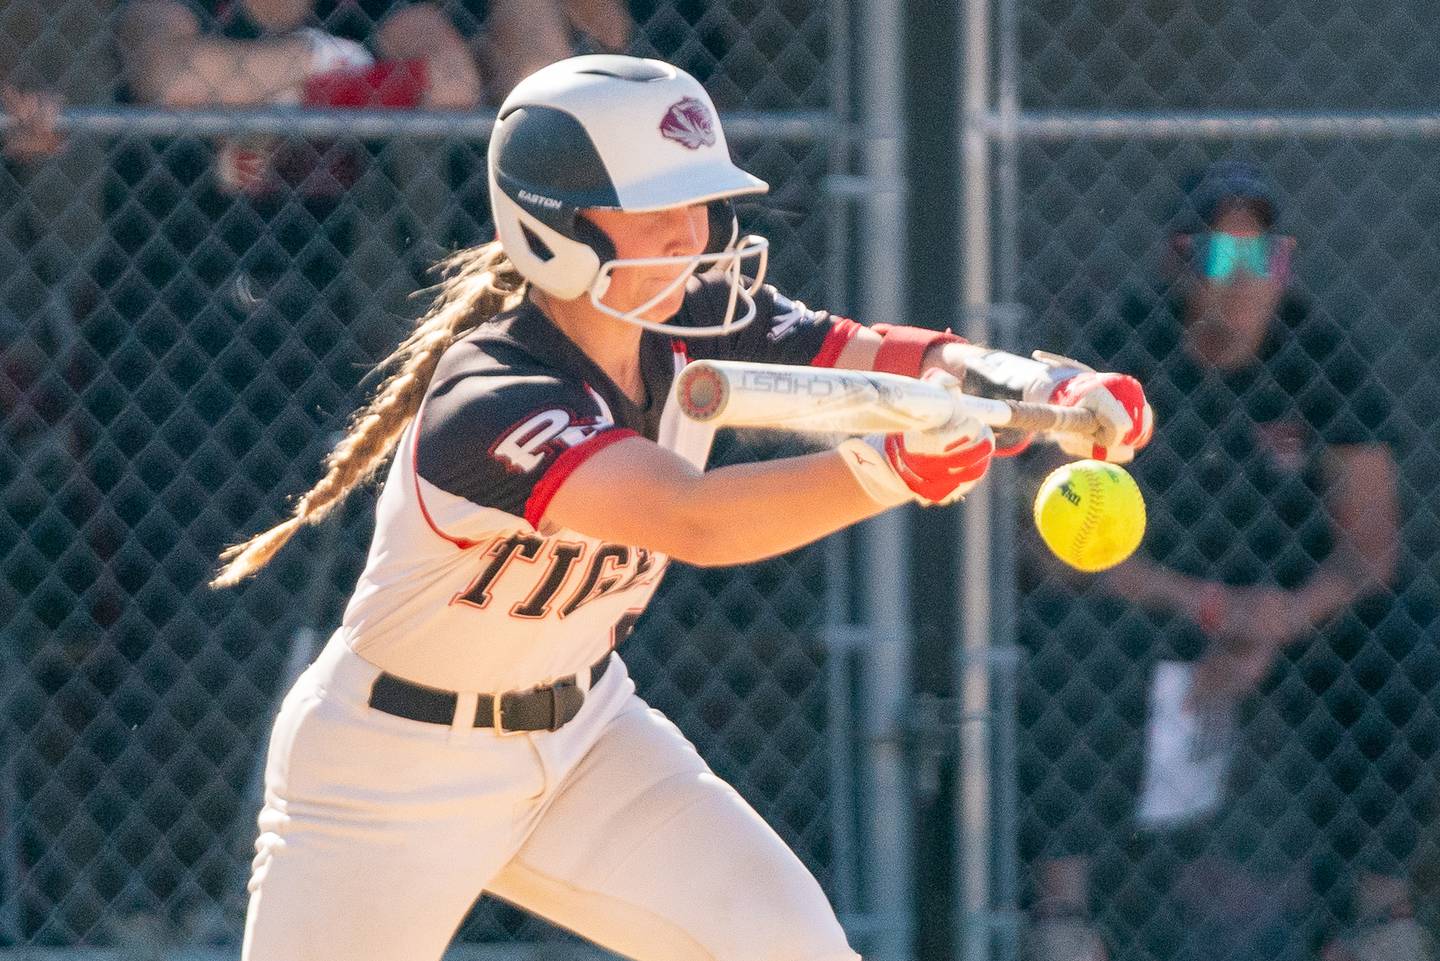 Plainfield North's Alexandra Sikora (6) bunts the ball against Yorkville during the Class 4A Yorkville Regional softball final at Yorkville High School on Friday, May 26, 2023.